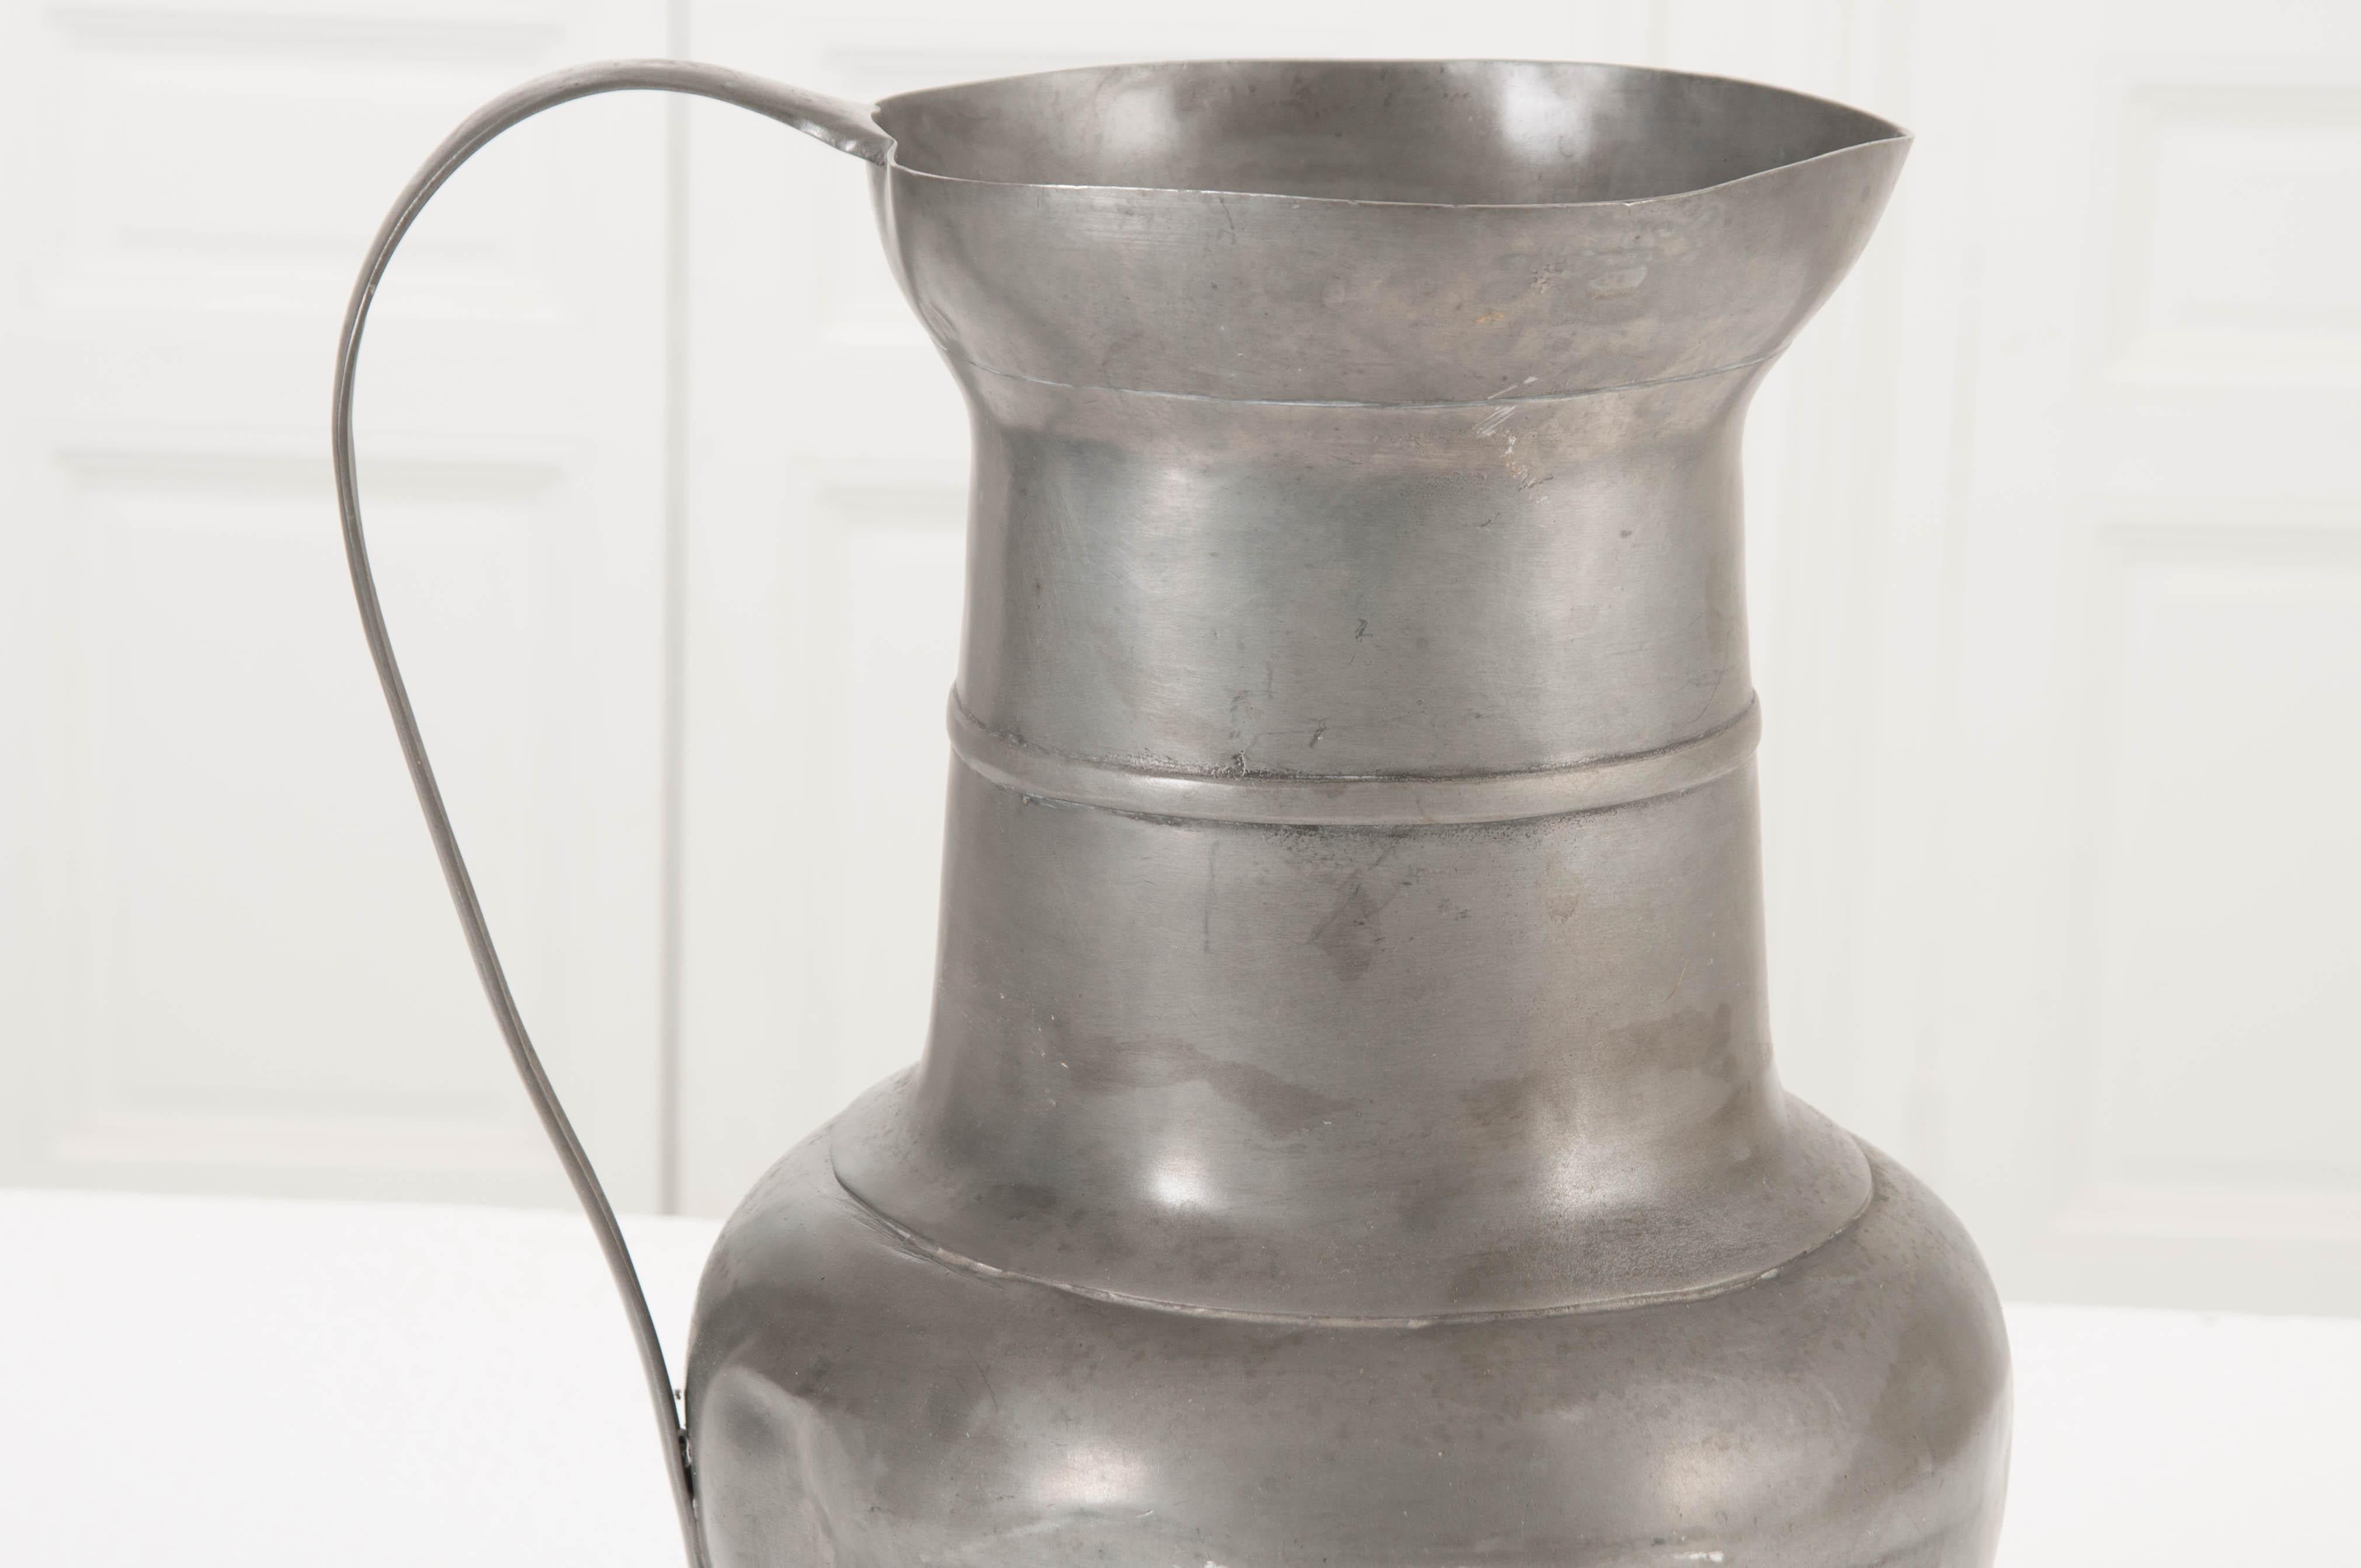 This sizable pewter pitcher was made in Scotland, towards the end of the 19th century. The solid metal vessel has acquired a weathered patina that pewter acquires so well, softening the metallic finish and making for a beautiful antique. Accessorize